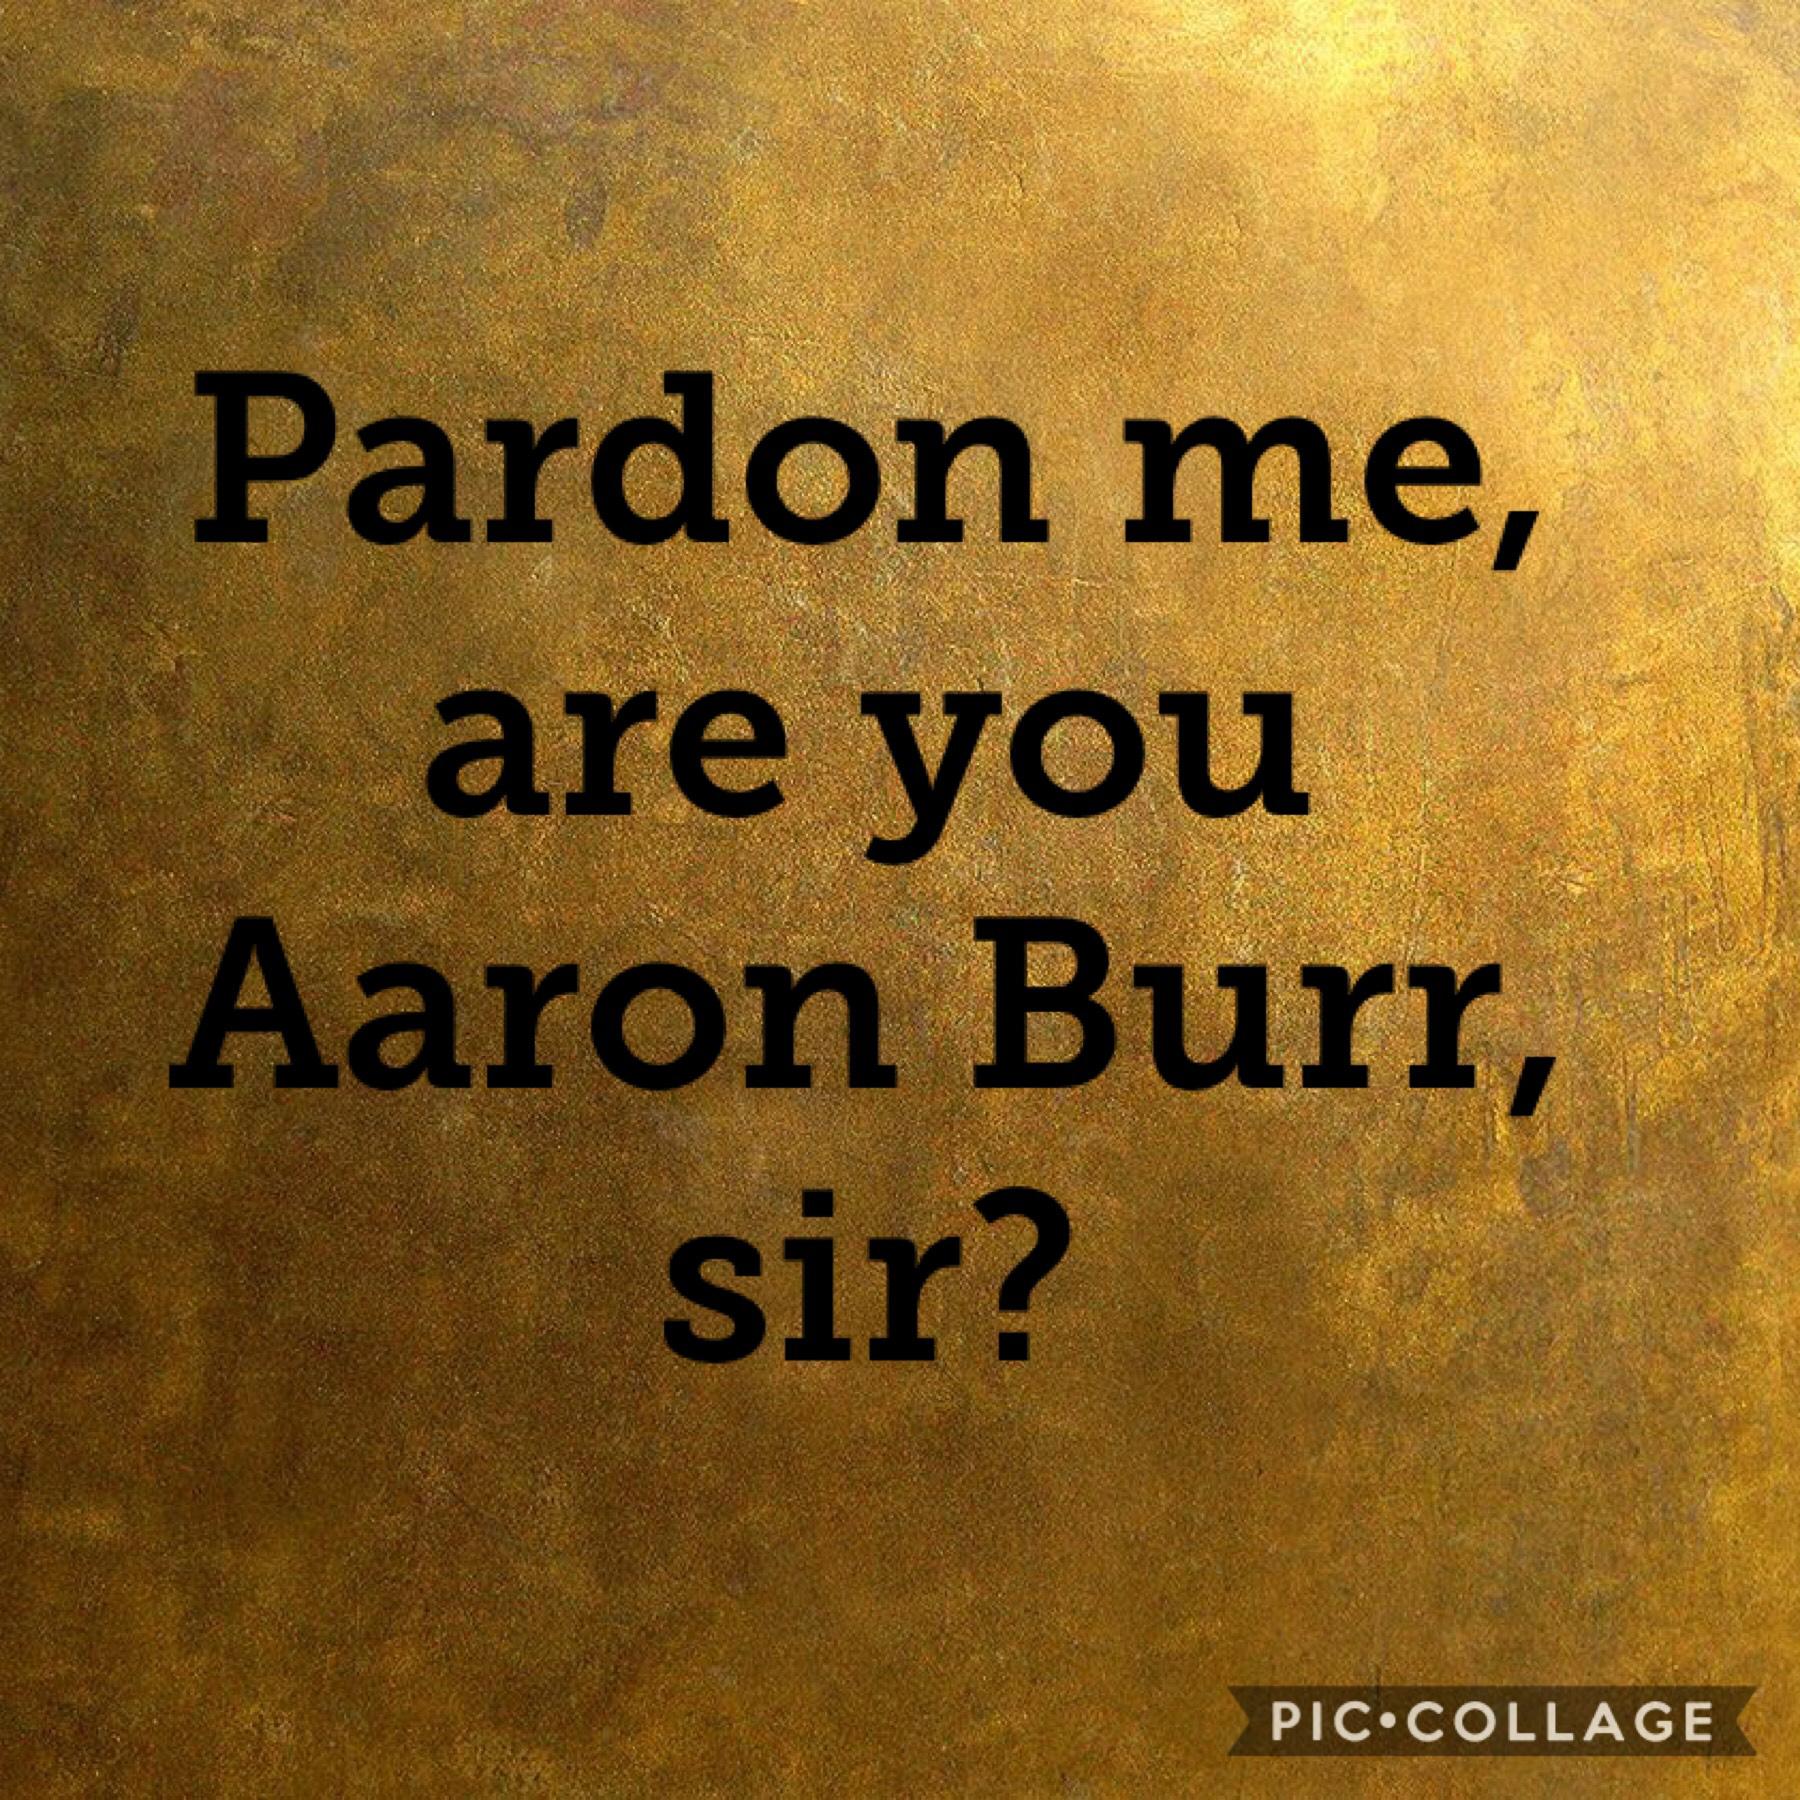 Reference to the song, "Aaron Burr, Sir”